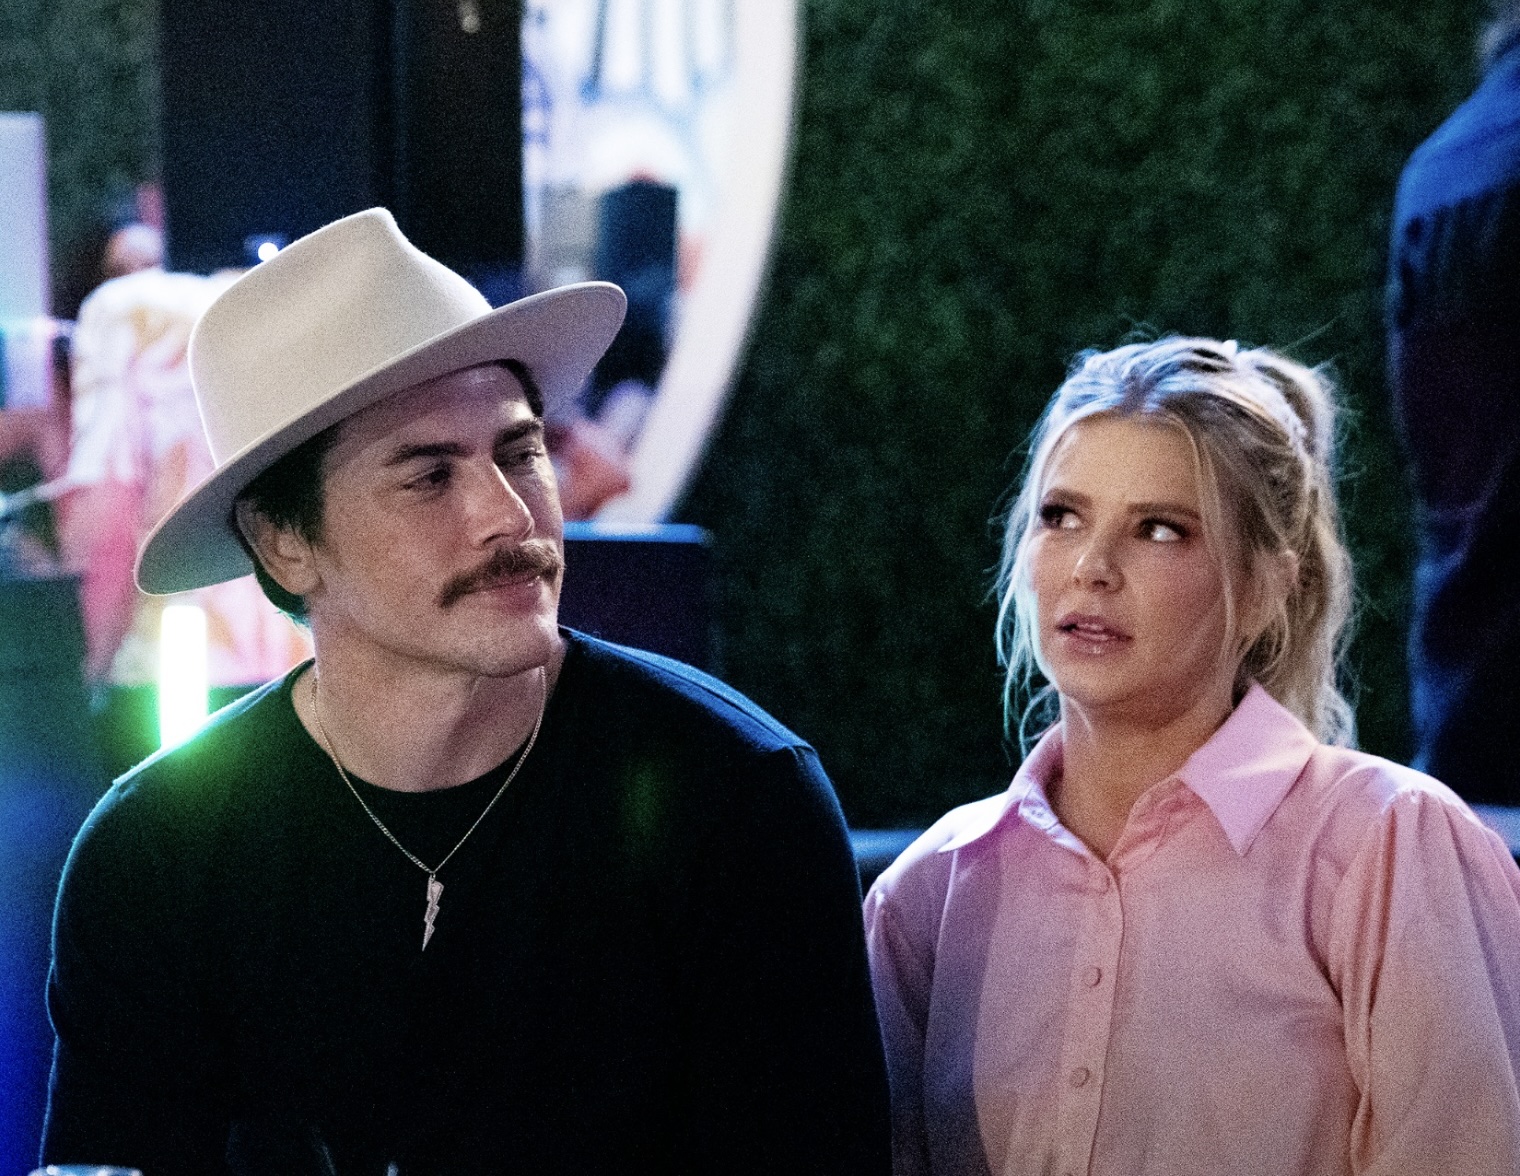 Tom Sandoval (L) in a black shirt and tan hat and Ariana Madix in a pink button-up blouse.